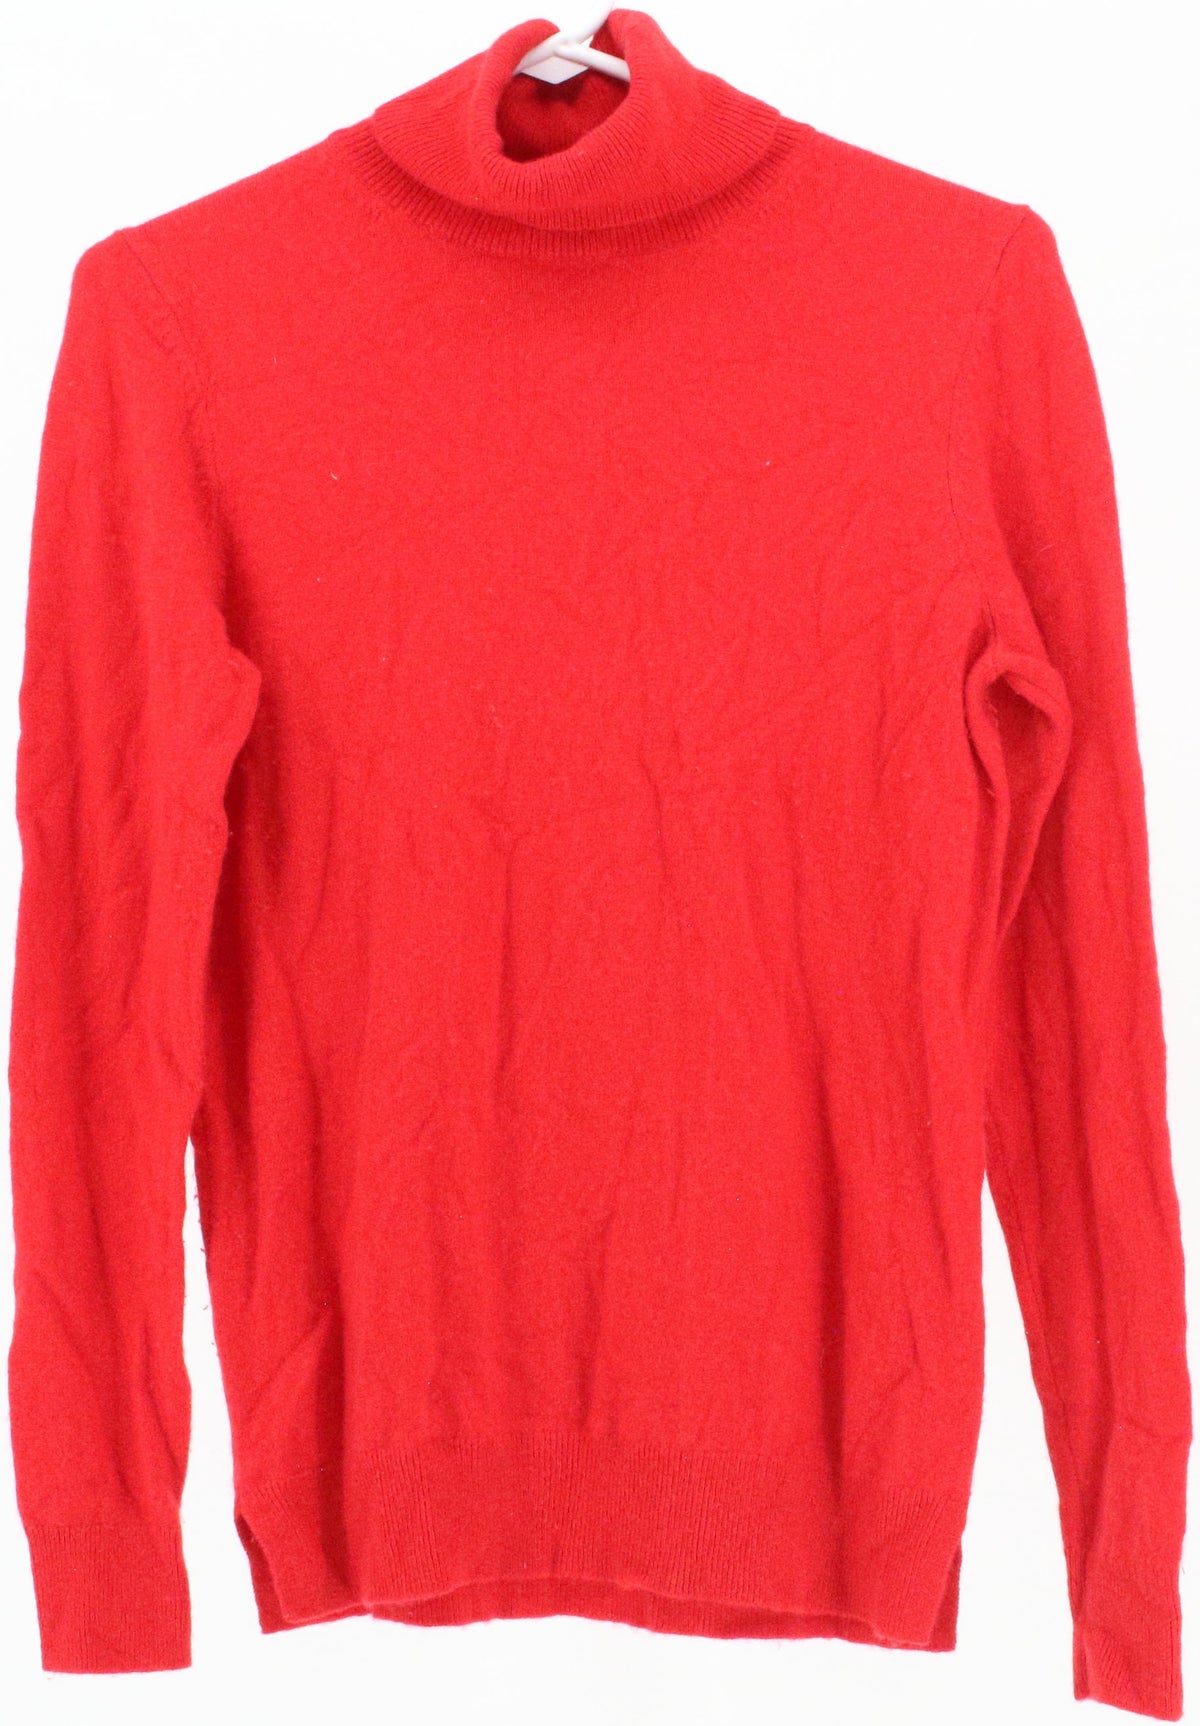 Ann Taylor Red Turtleneck Cashmere Sweater